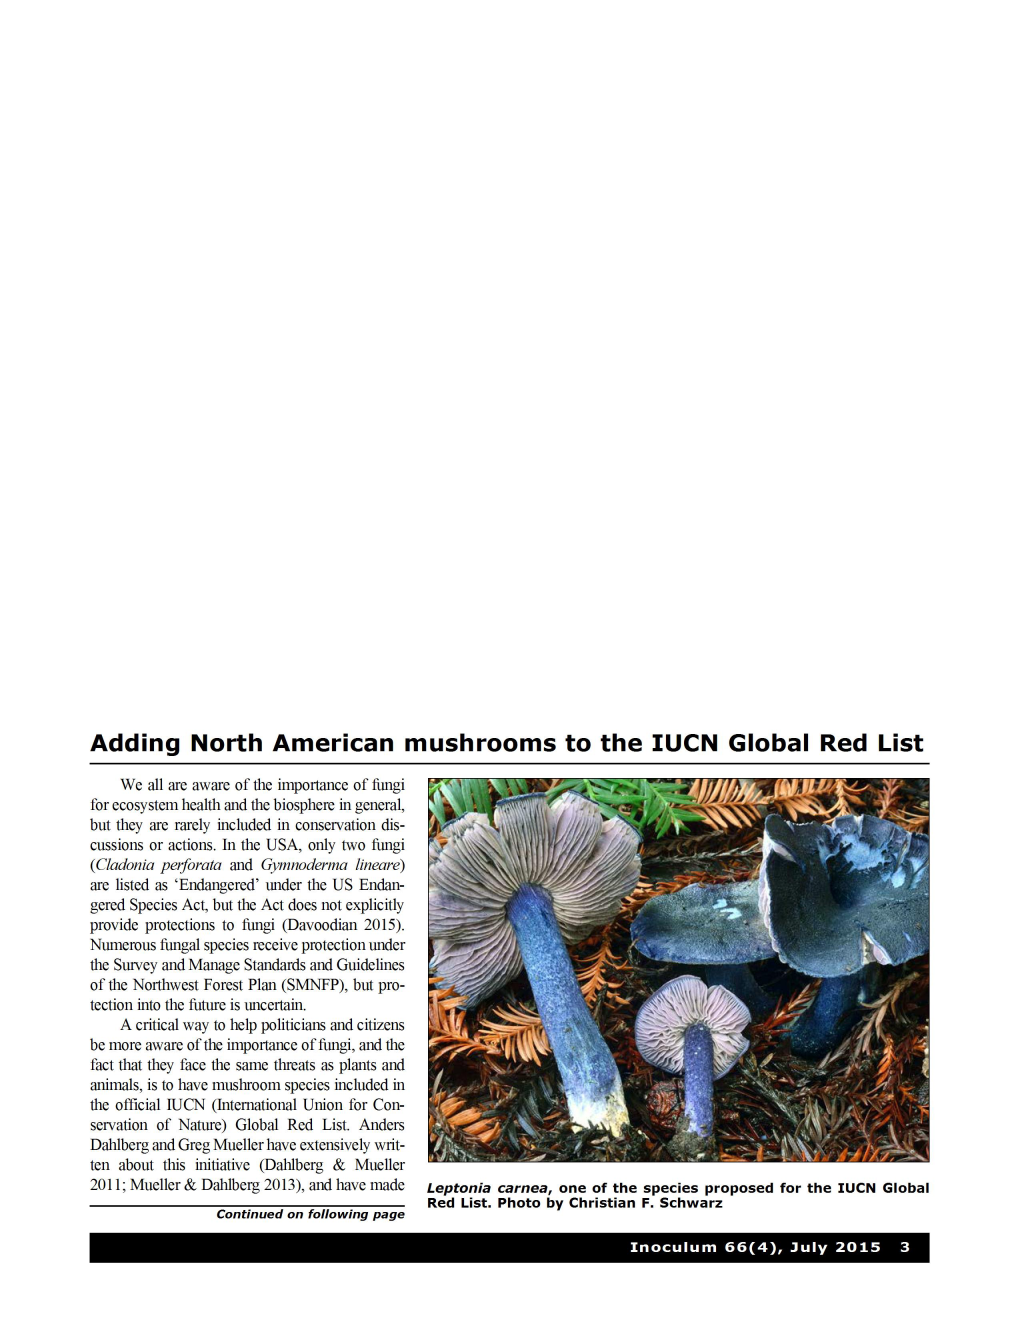 Adding North American Mushrooms to the IUCN Global Red List